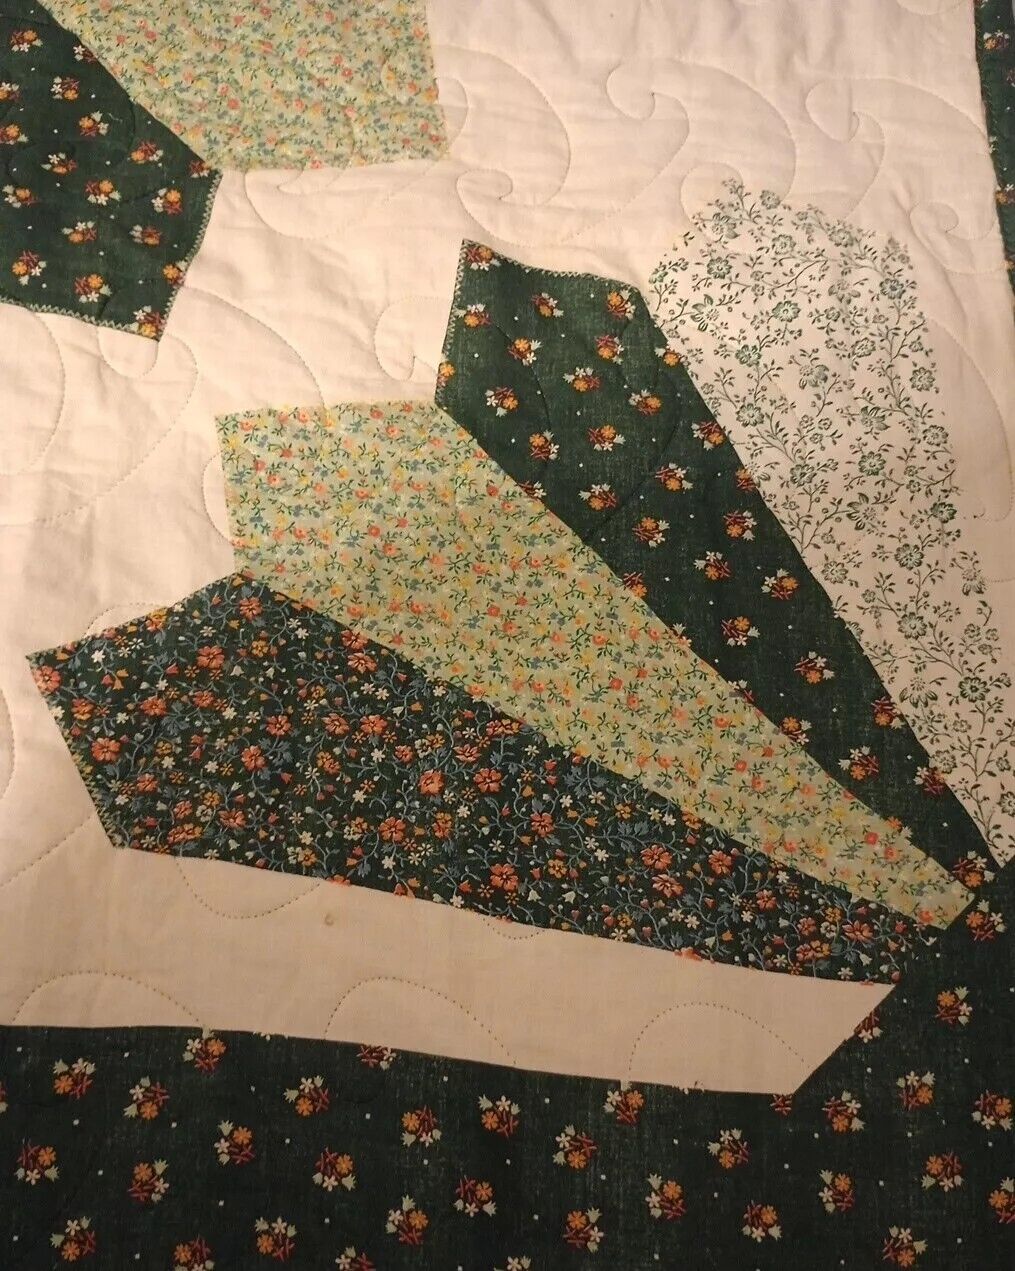 Large Grannycore Fan Pattern Quilt, Swirl Sewing Pattern,  Approx 88x104